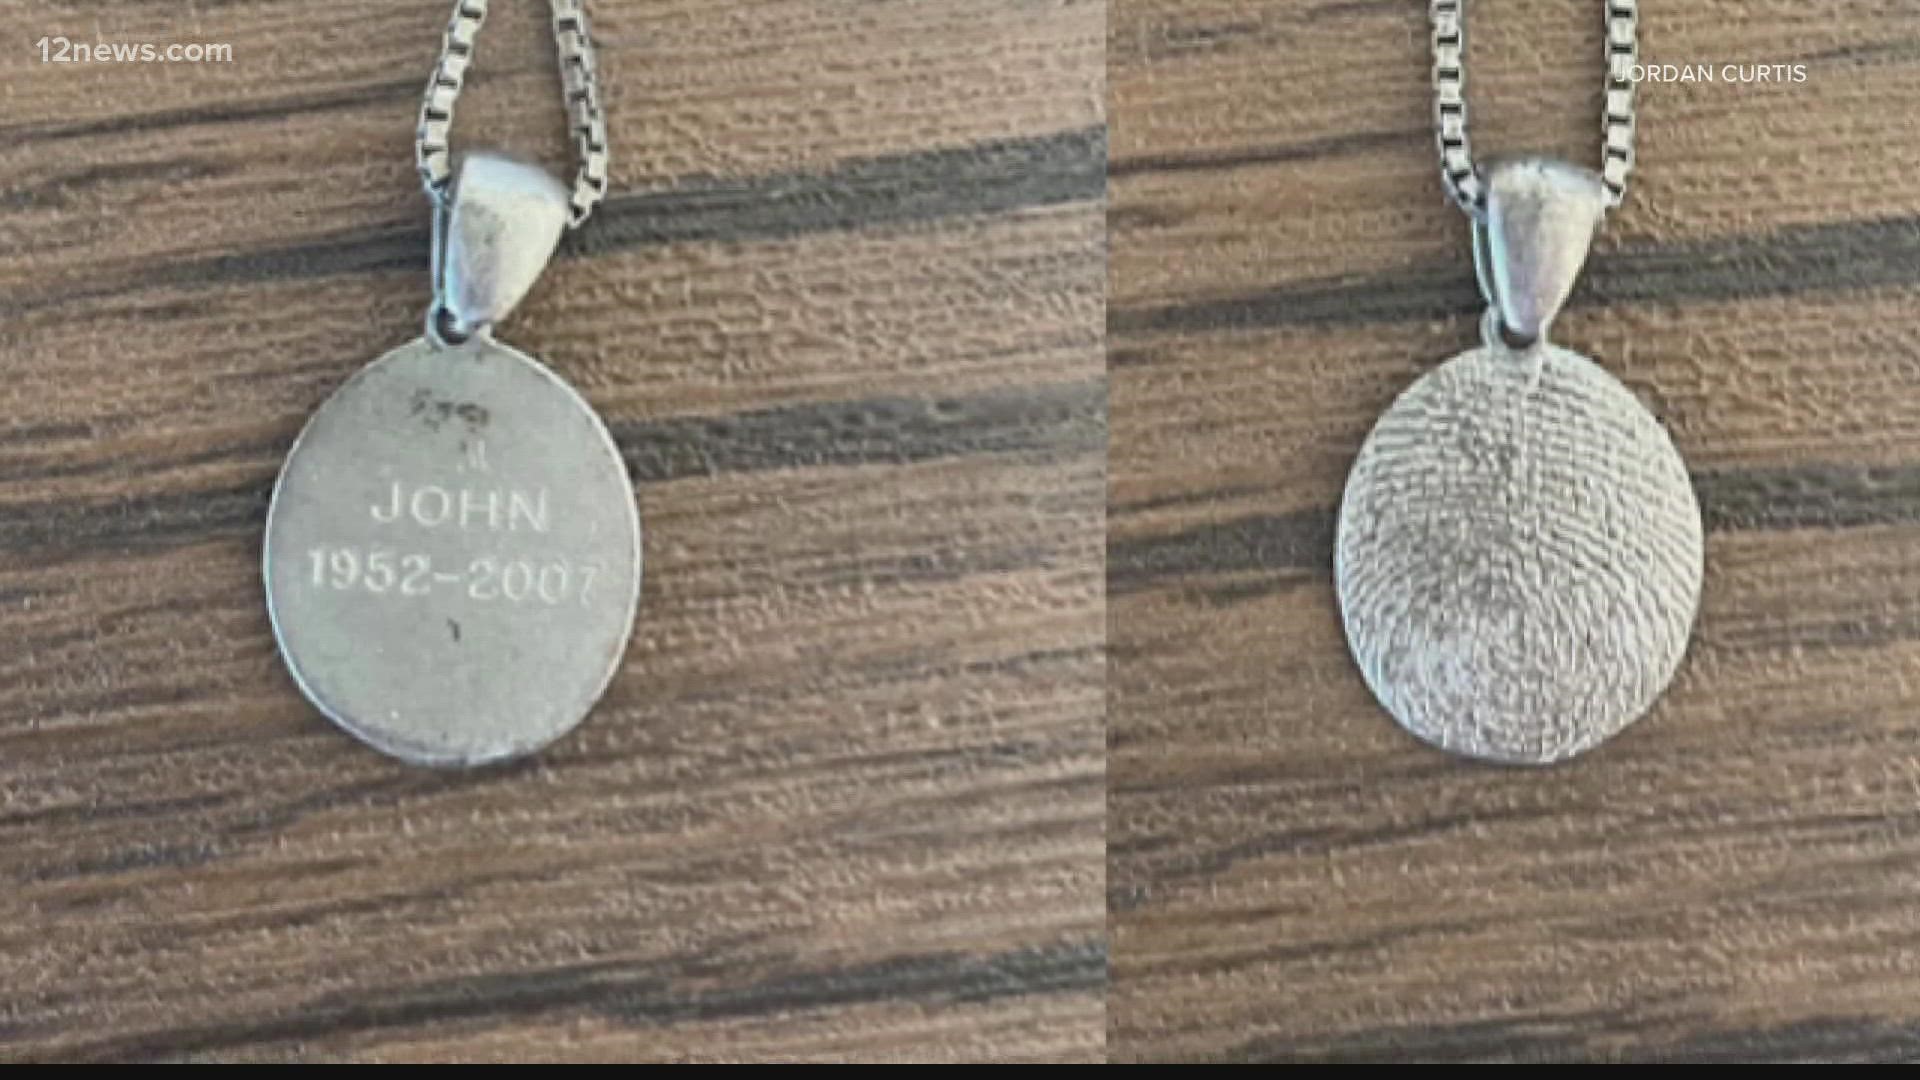 Valley woman reunited with precious keepsake from her late husband